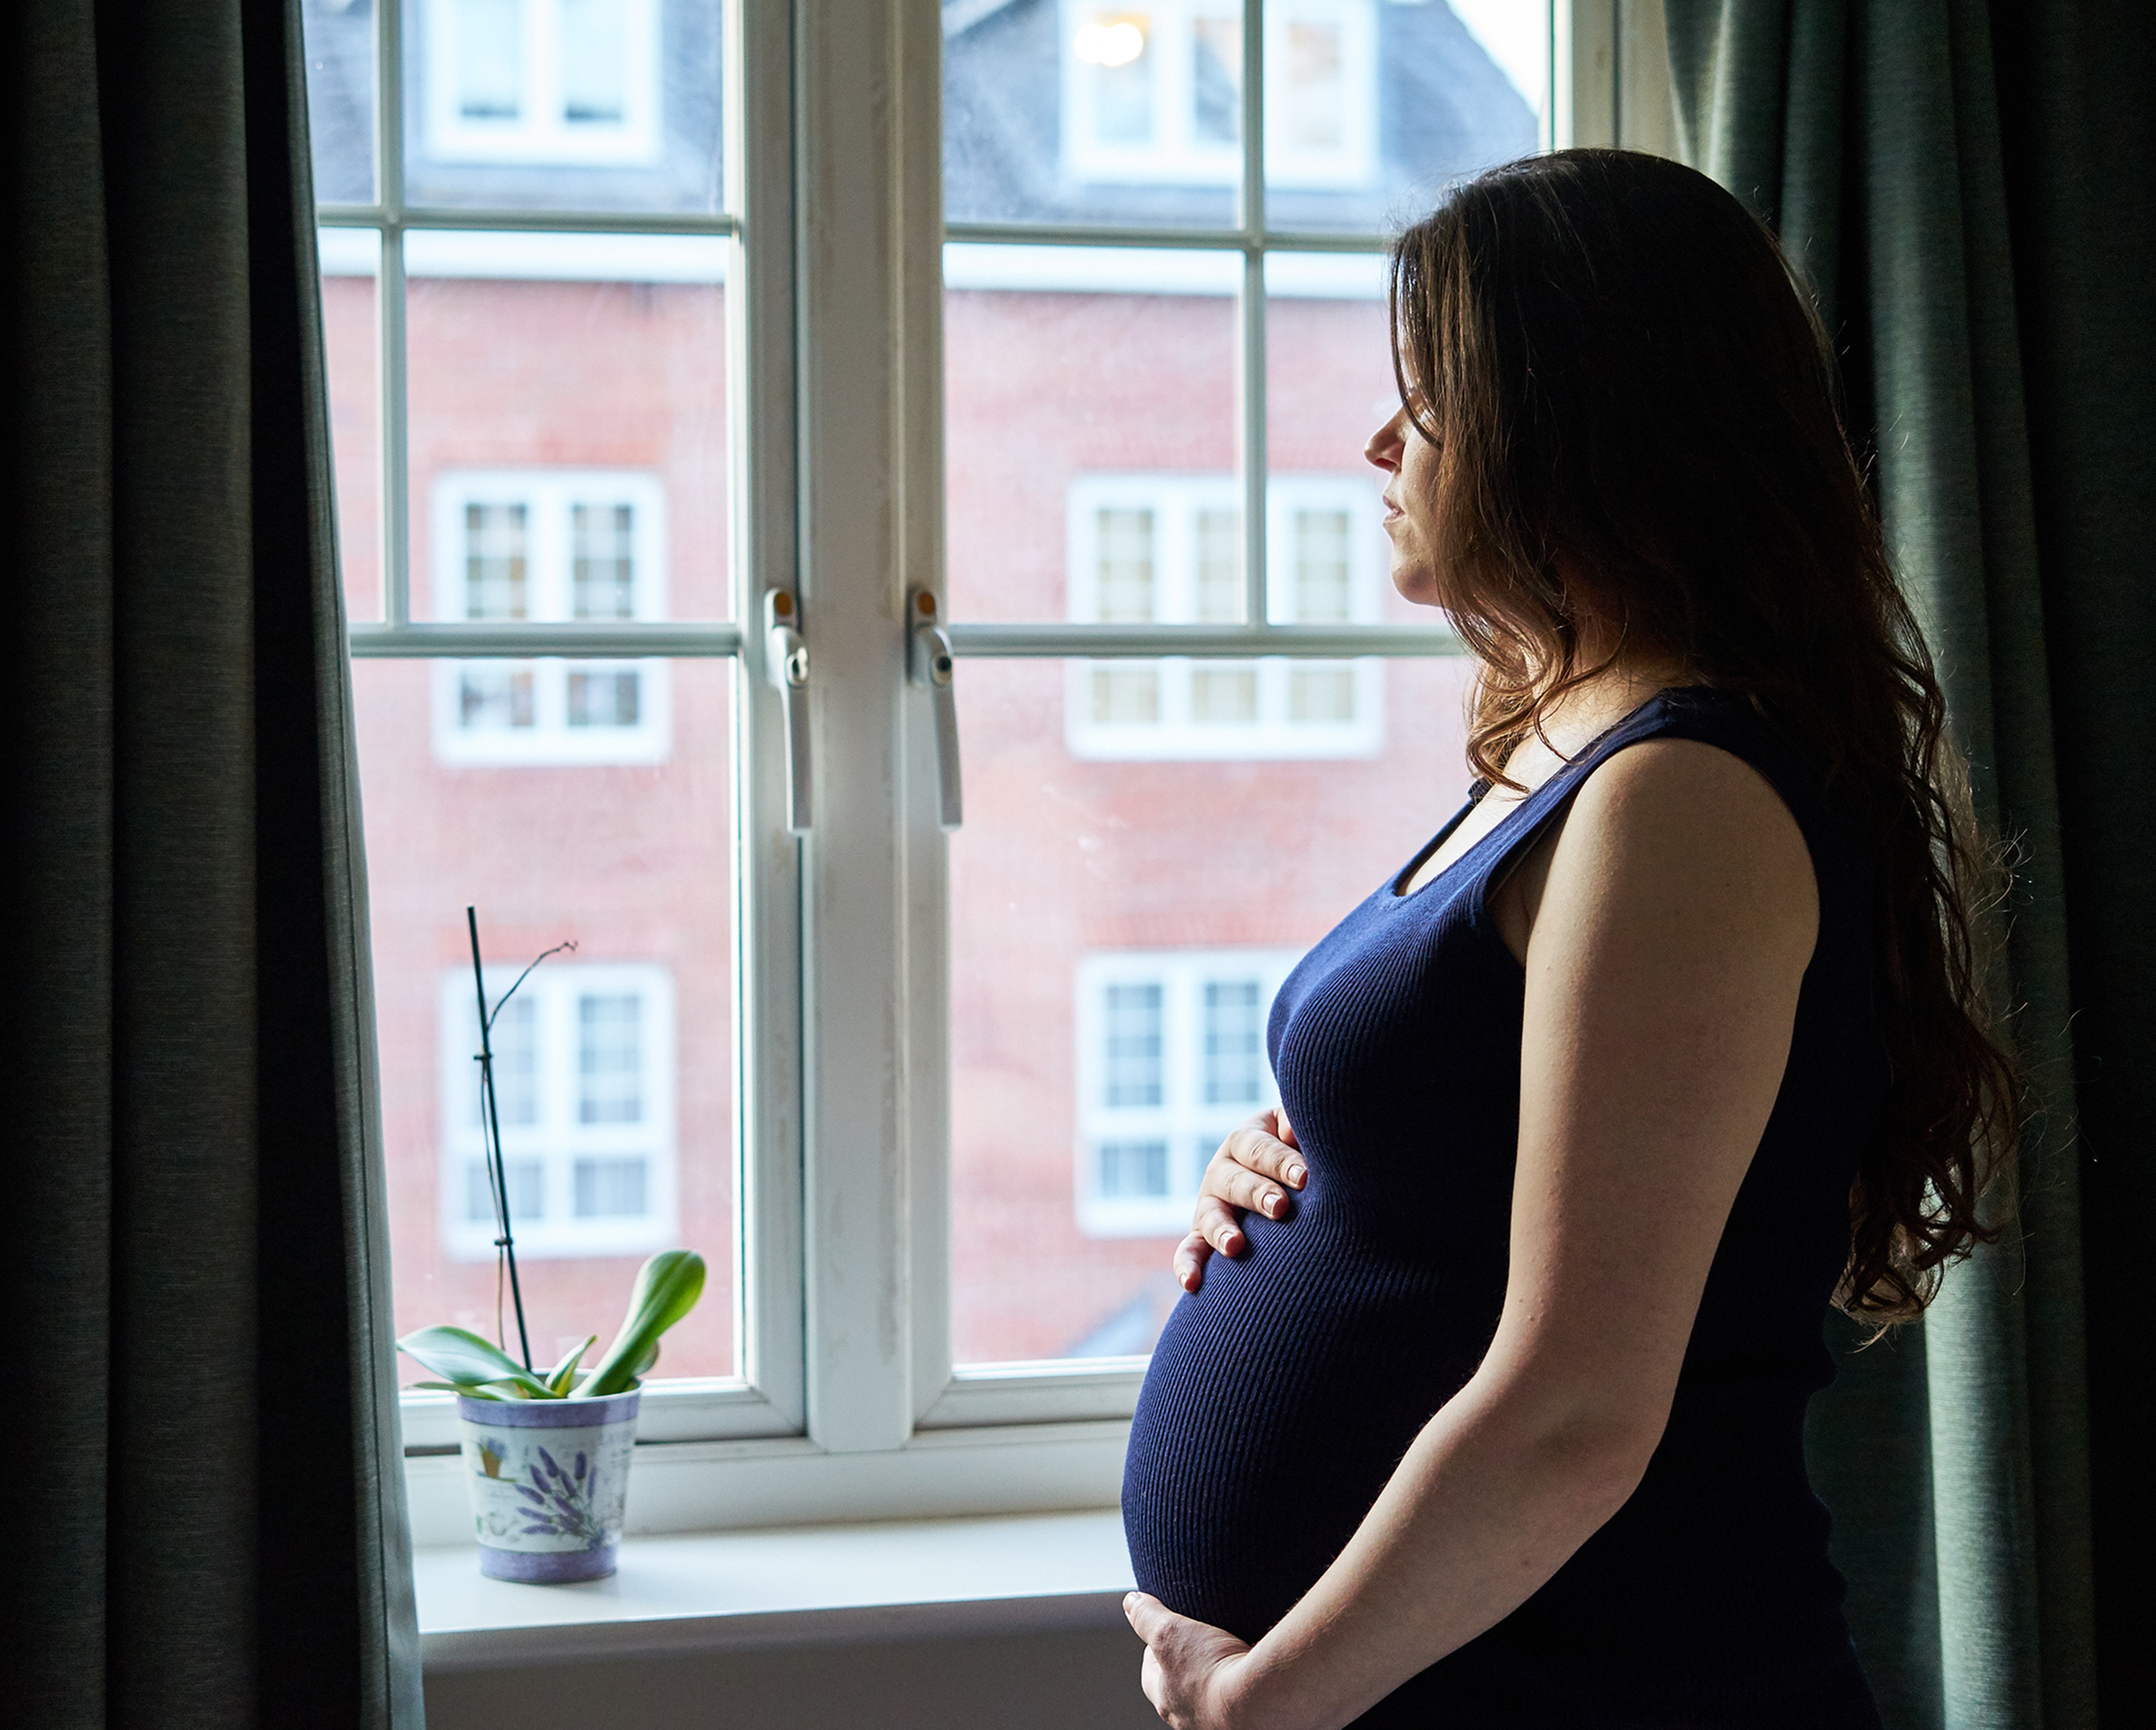 Pregnant woman looking out of window holding baby bump